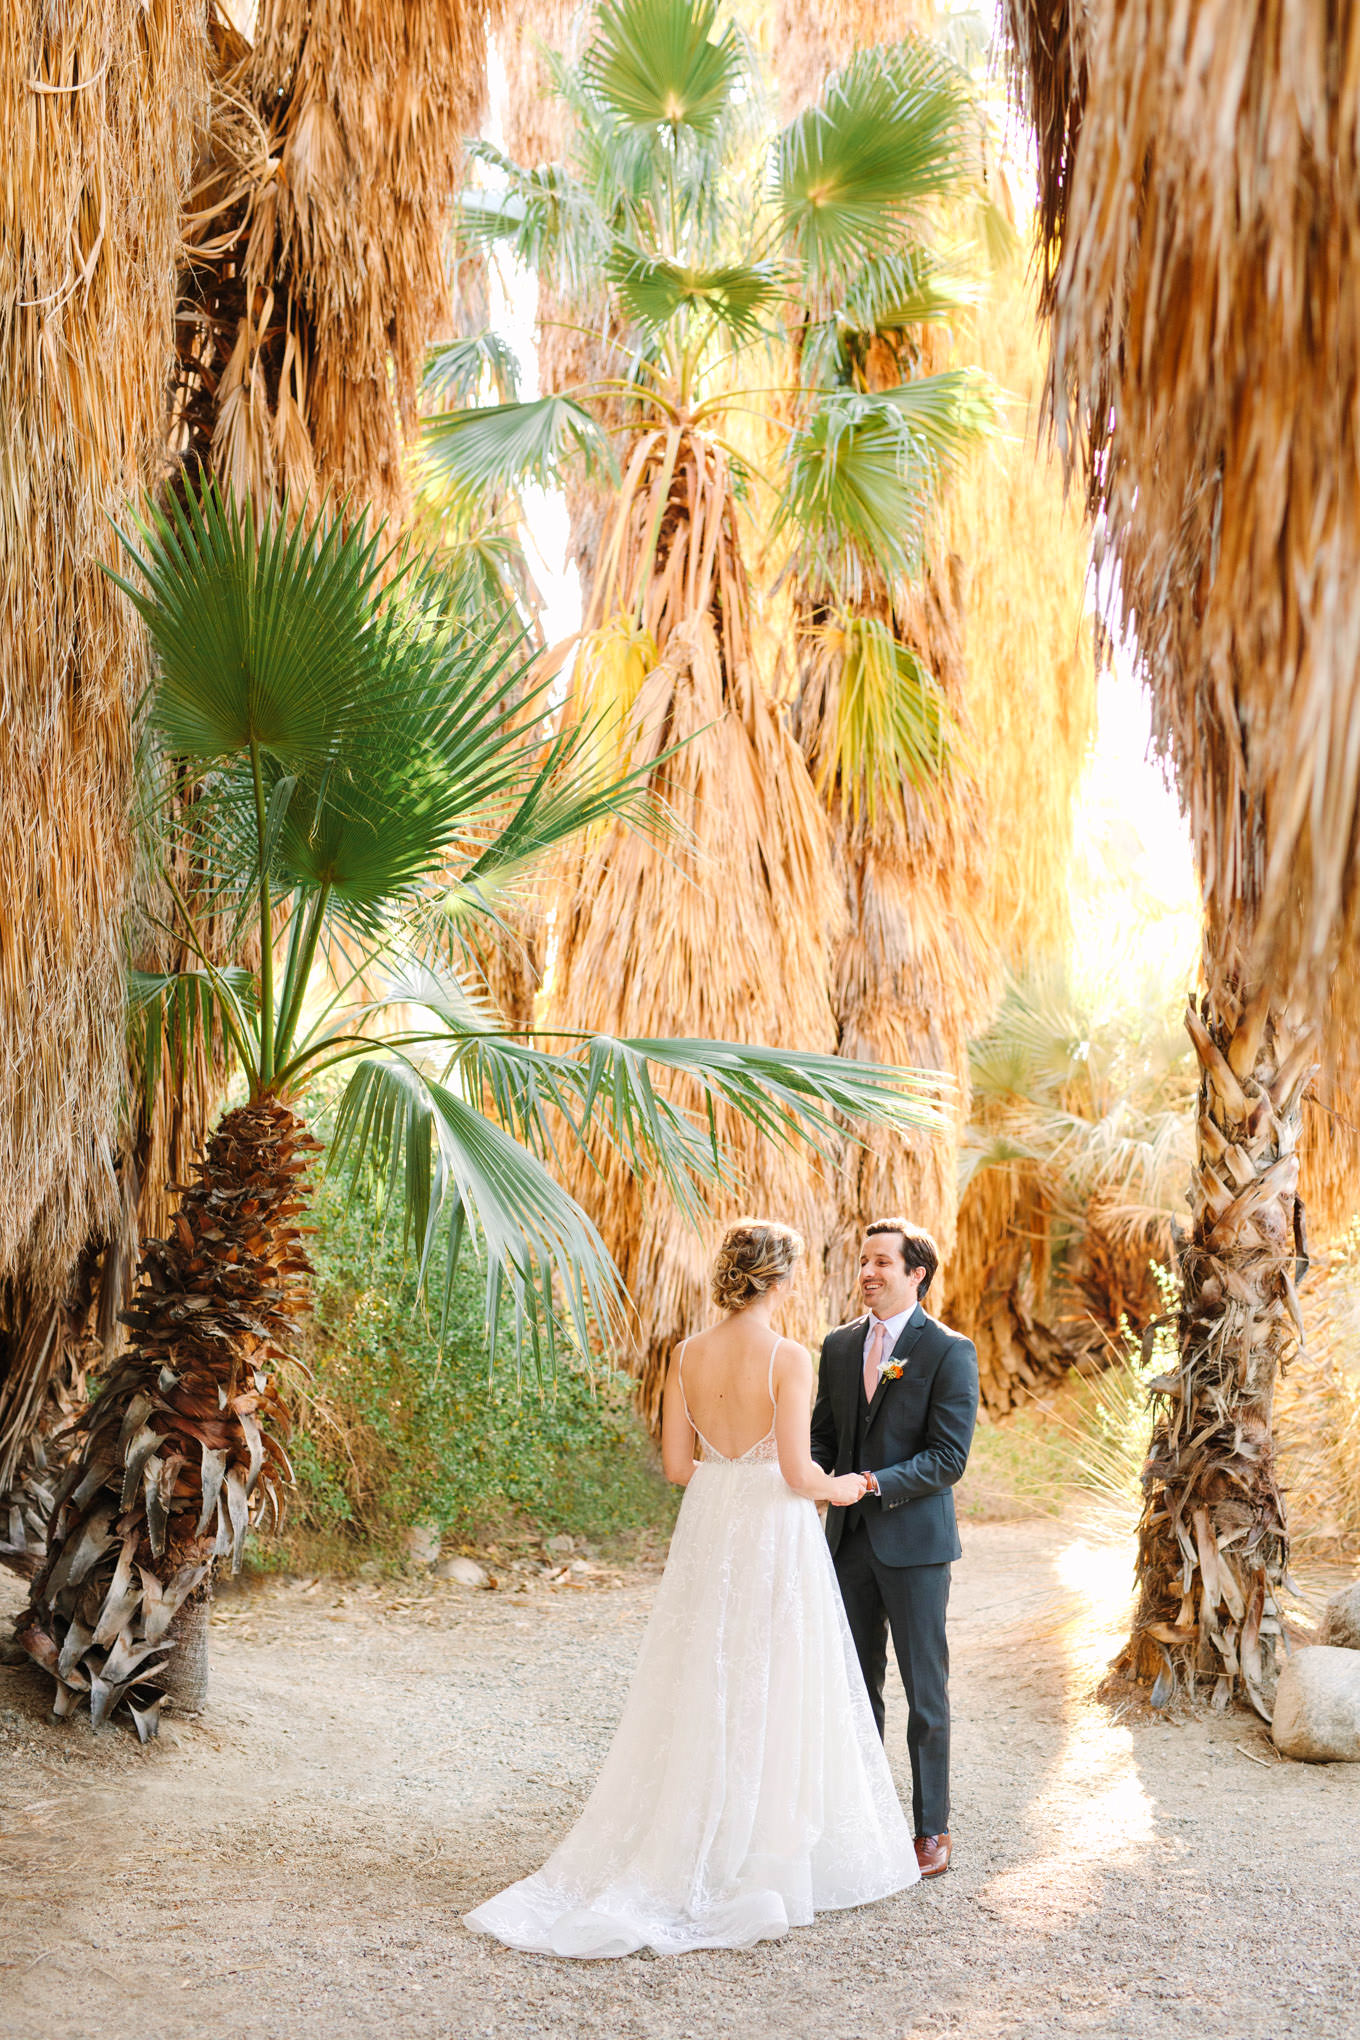 Bride and groom first look in palm garden | Living Desert Zoo & Gardens wedding with unique details | Elevated and colorful wedding photography for fun-loving couples in Southern California |  #PalmSprings #palmspringsphotographer #gardenwedding #palmspringswedding  Source: Mary Costa Photography | Los Angeles wedding photographer 